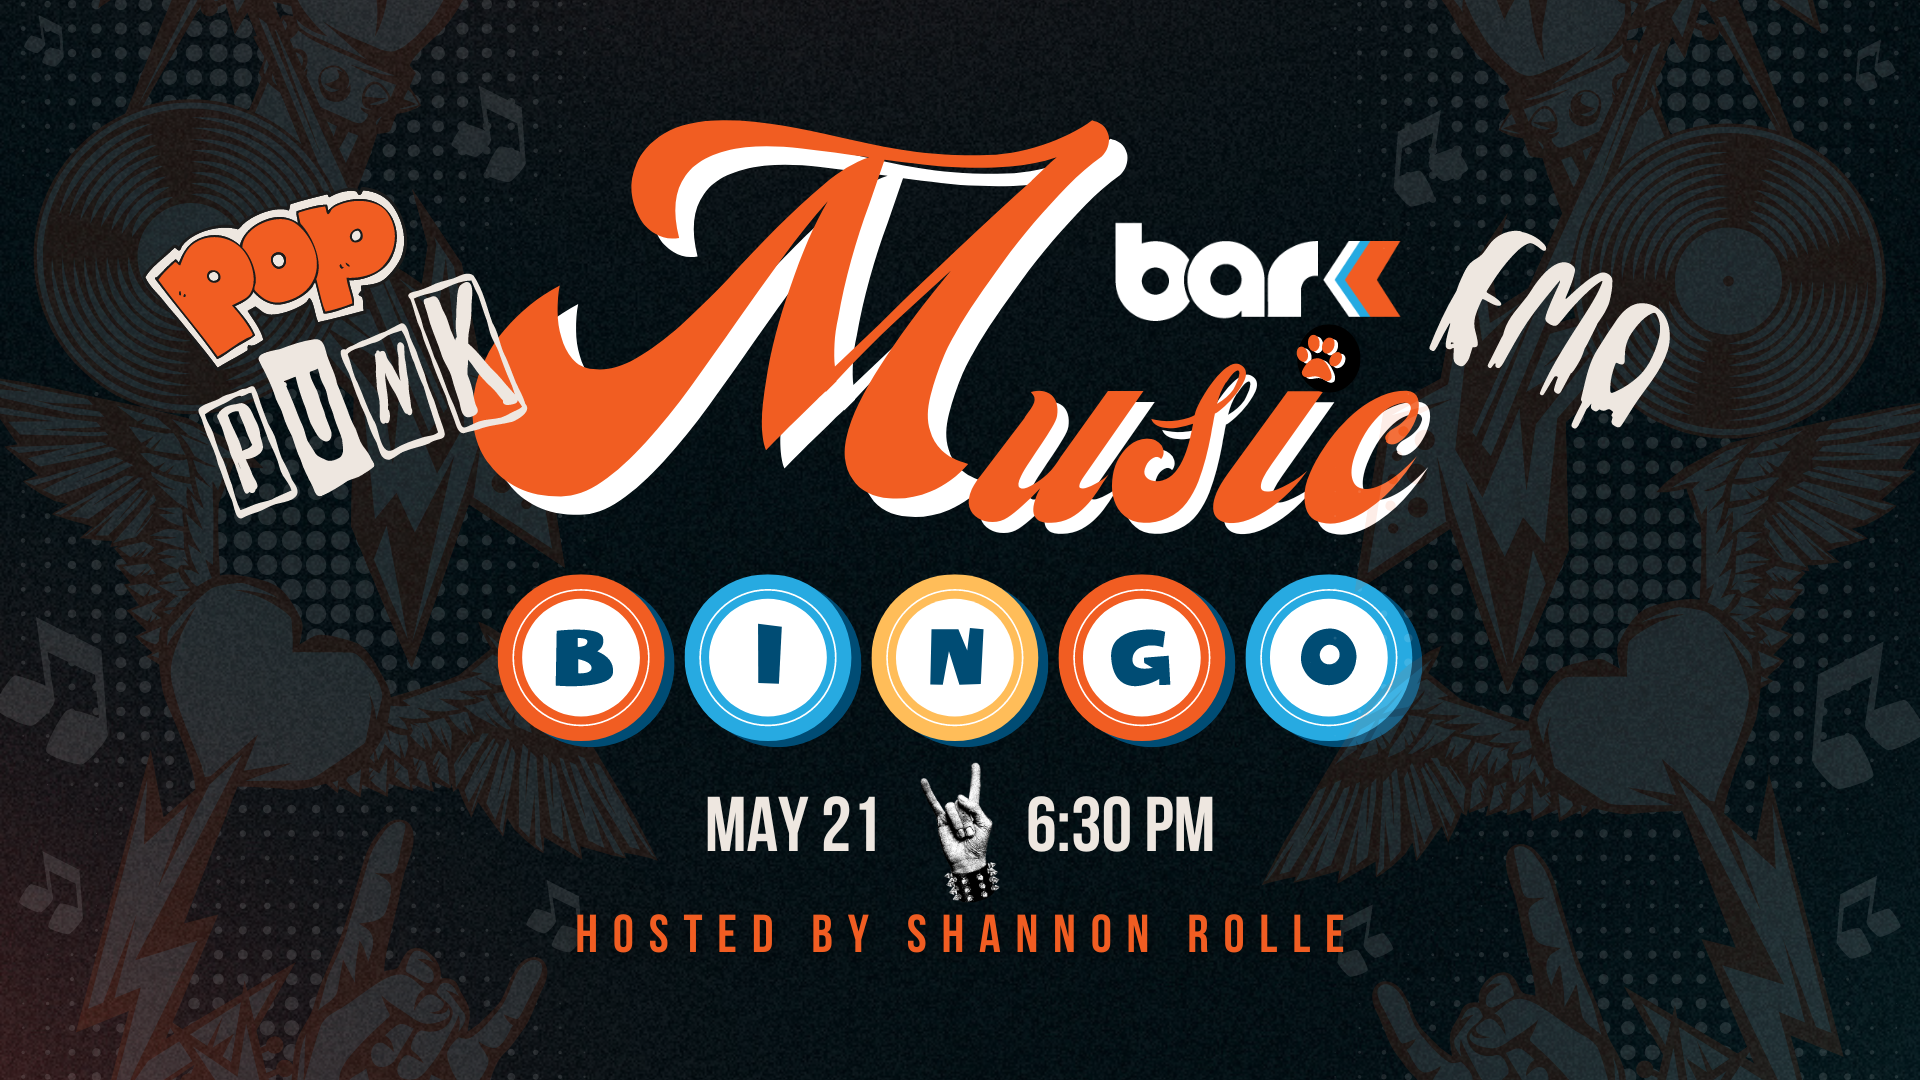 pop punk emo music bingo at Bar K may 21 6:30 pm hosted by shannon rolle